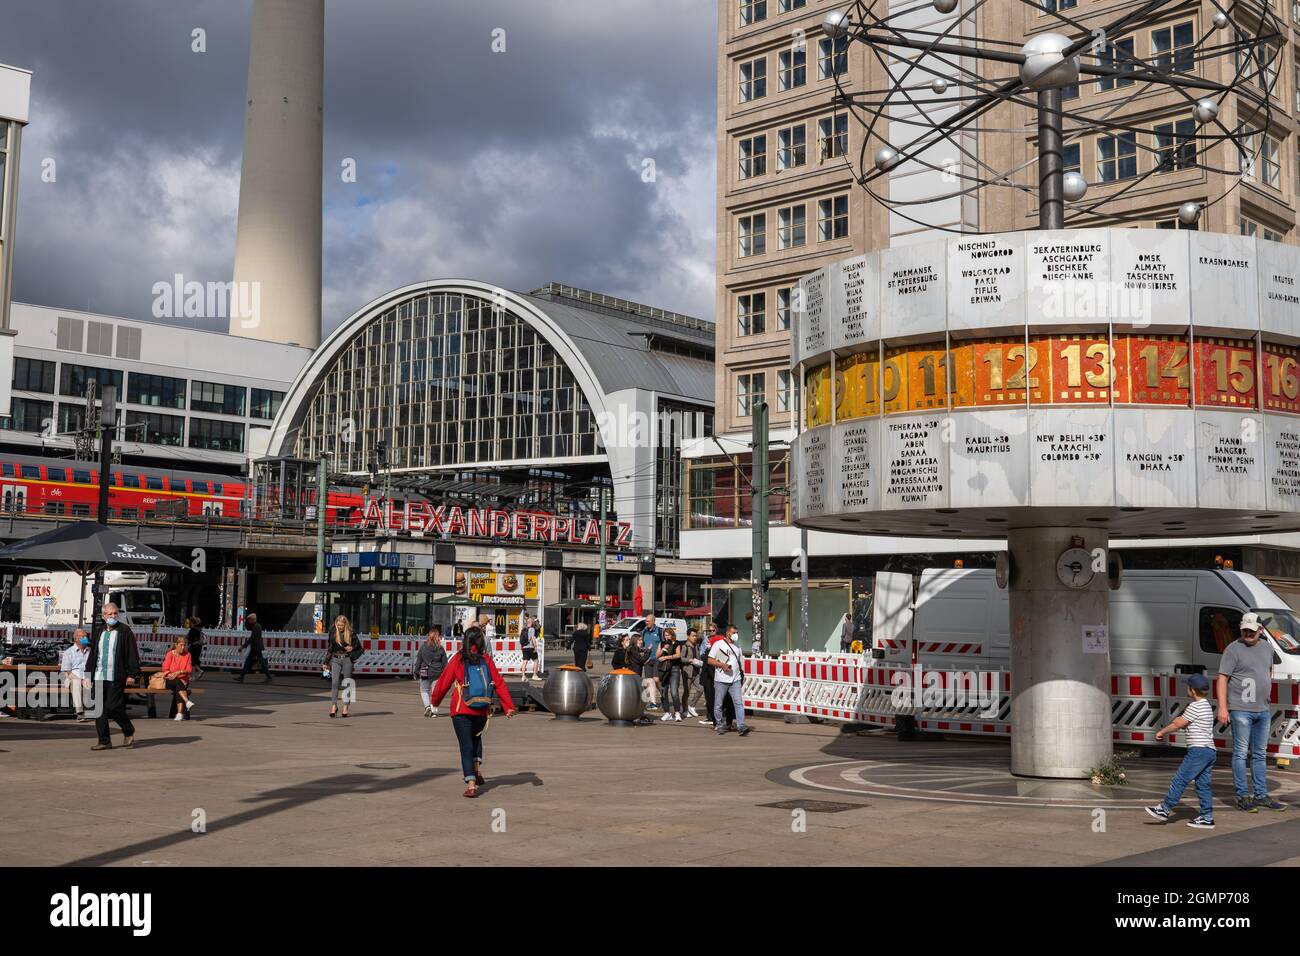 Berlin, Germany - August 2, 2021: Alexanderplatz city square in central Mitte district with view to World Time Clock and train station Stock Photo